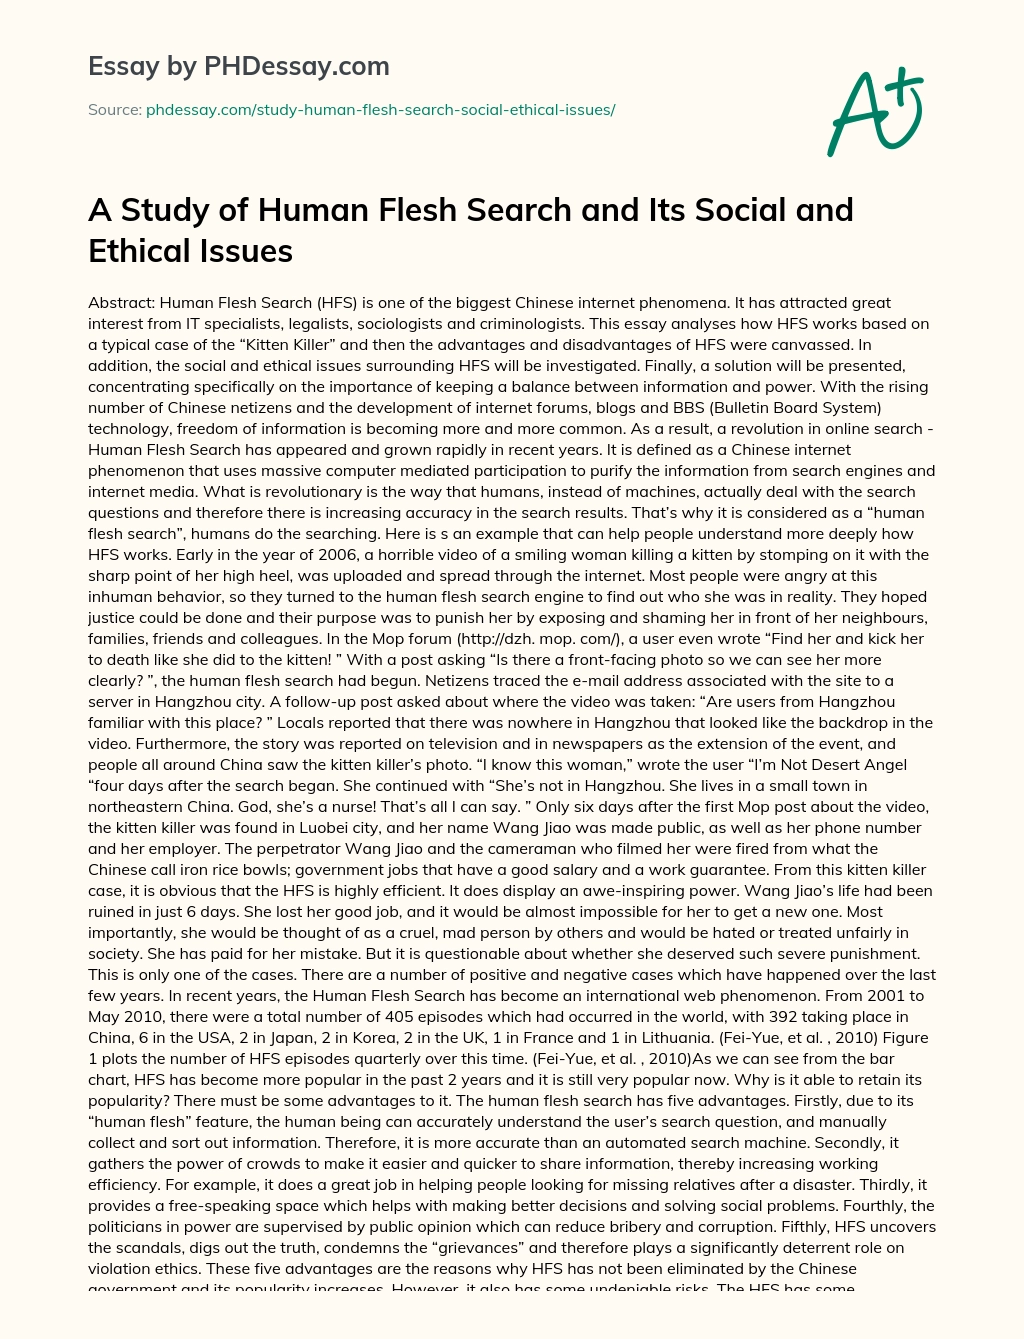 A Study of Human Flesh Search and Its Social and Ethical Issues essay